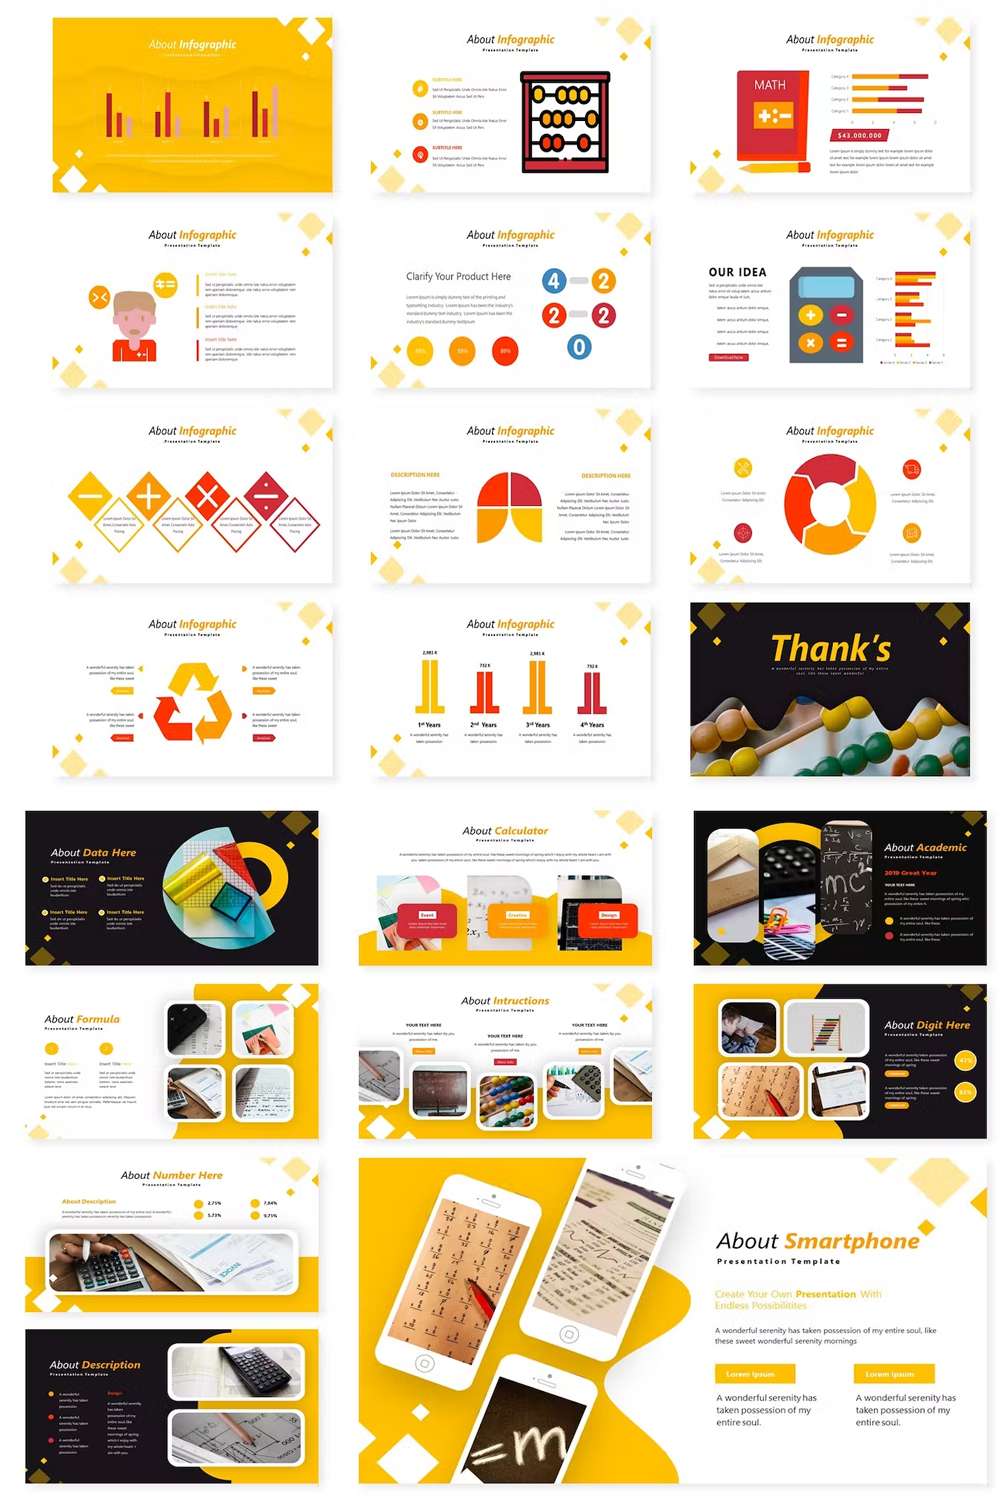 Illustrations counting keynote template of pinterest.